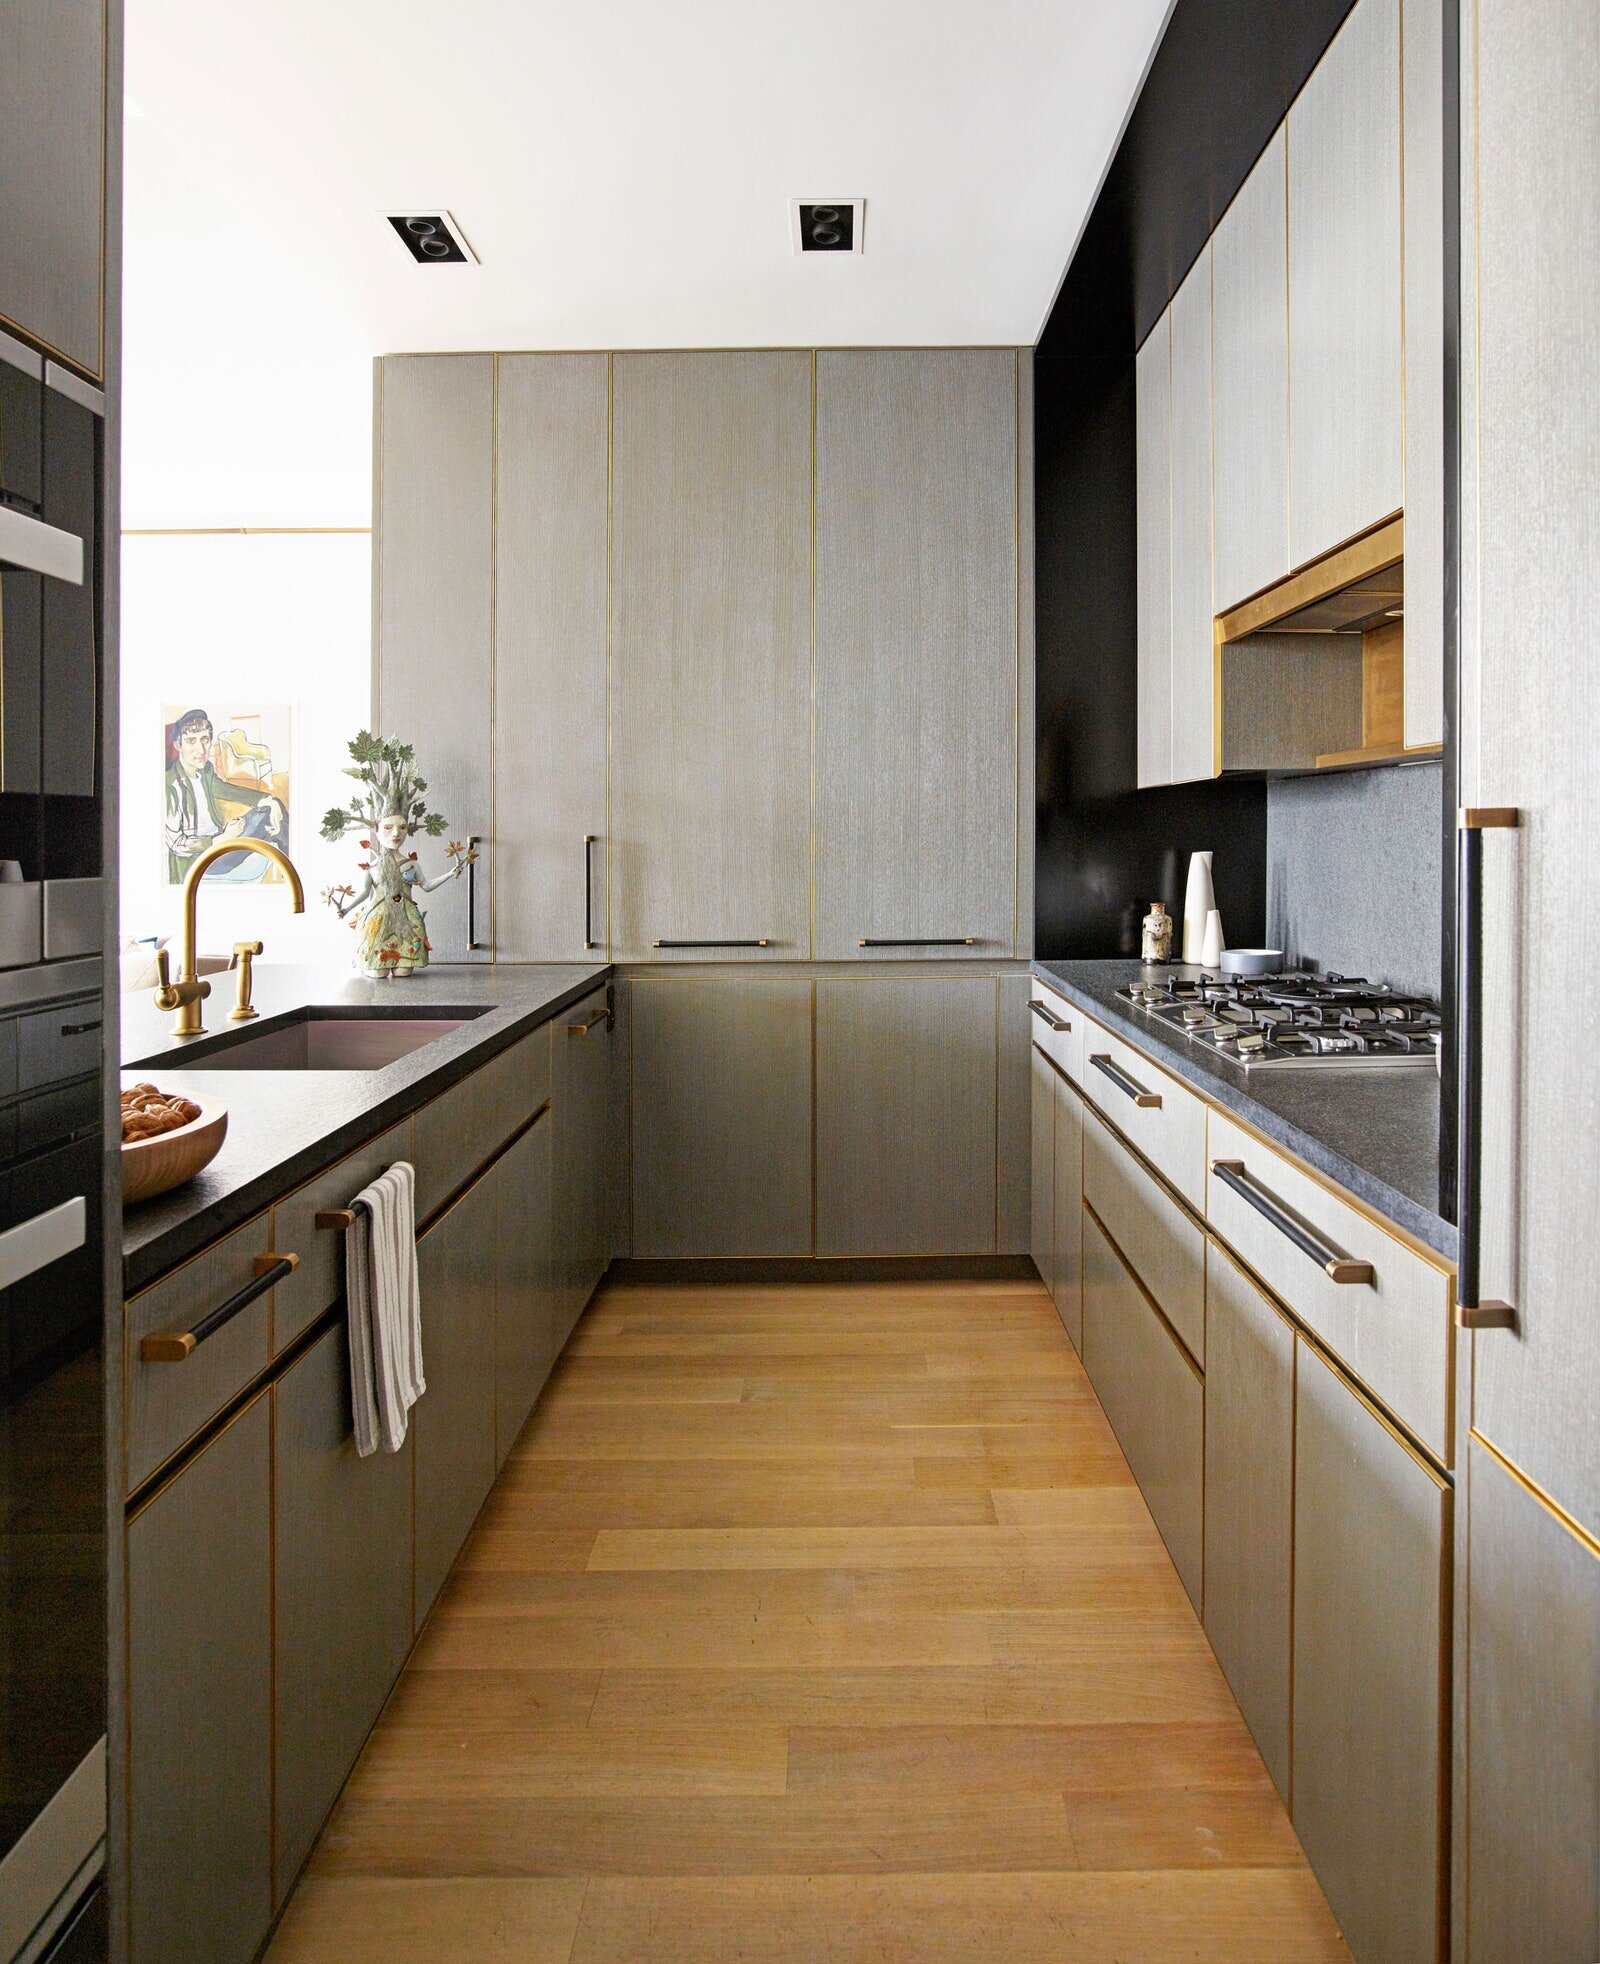 Compact Kitchen Units - What to Know Before You Buy